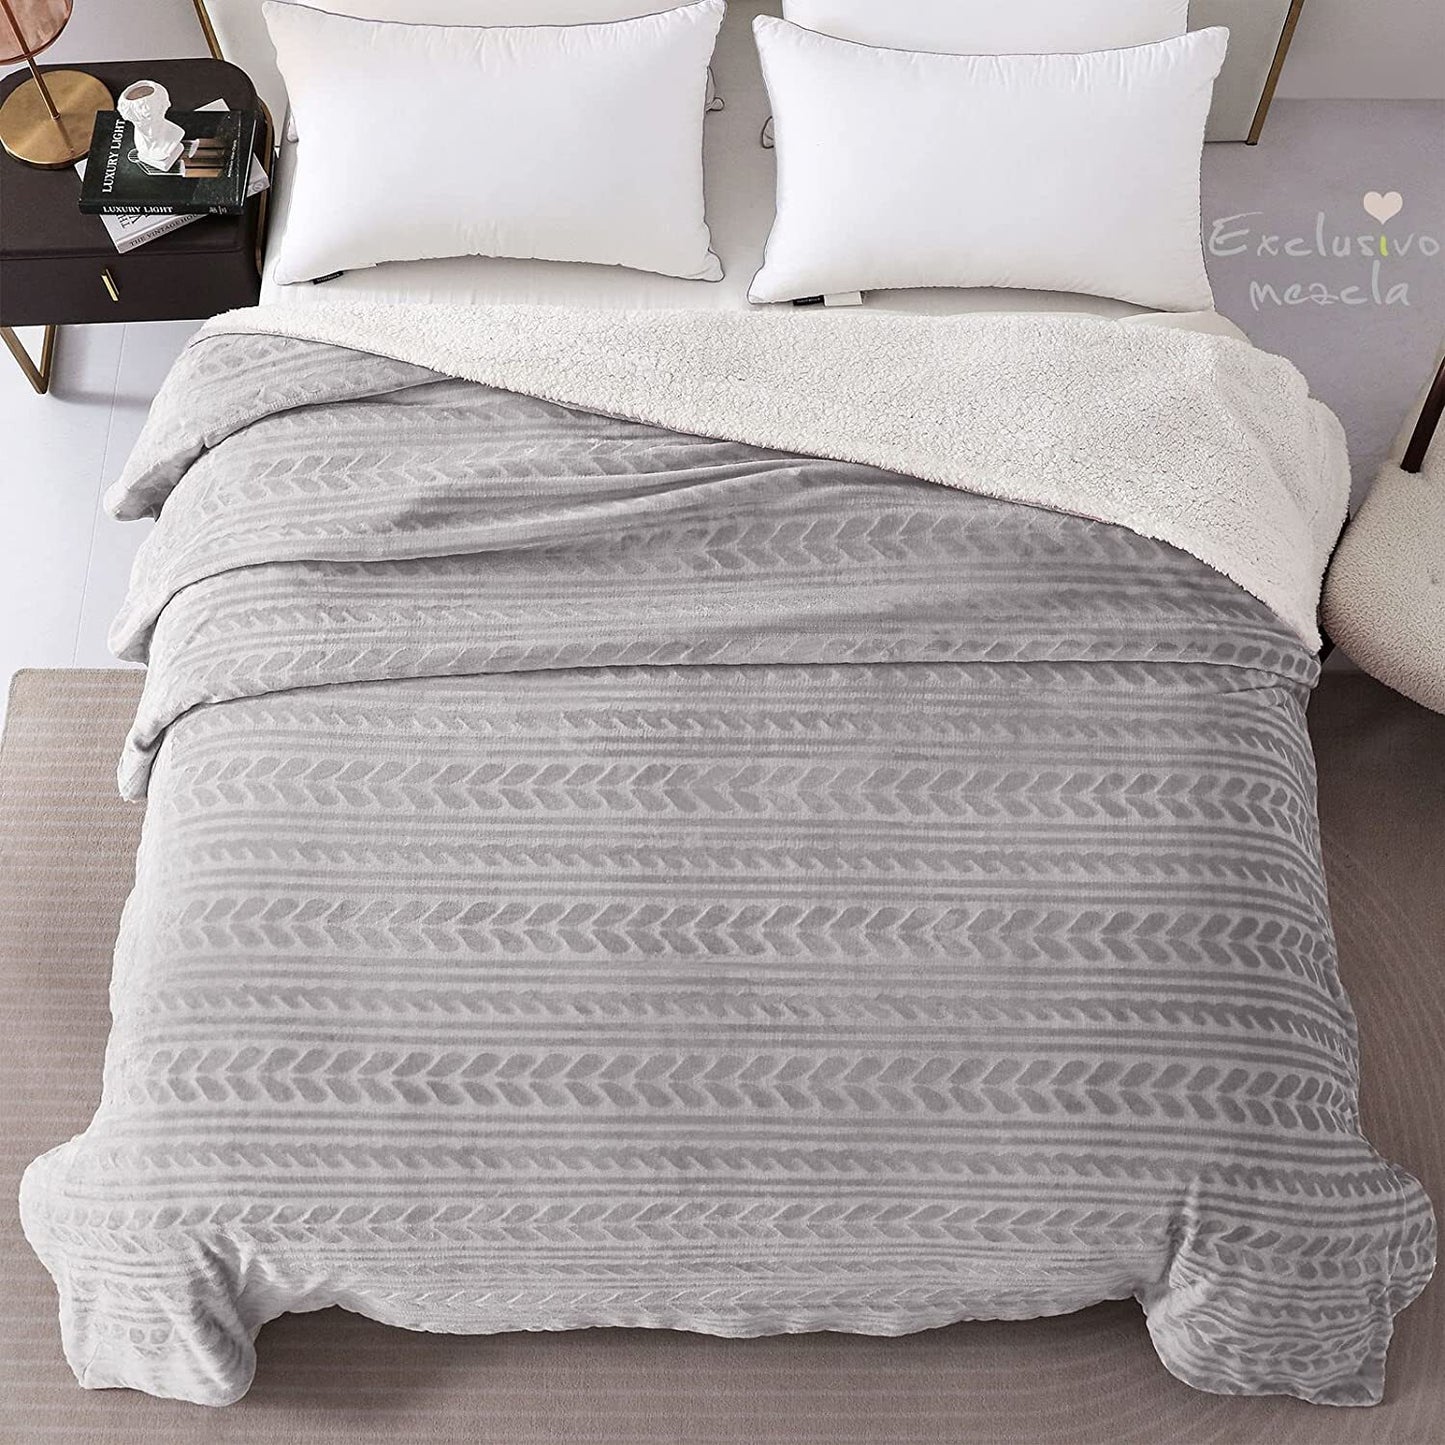 Exclusivo Mezcla King Size Sherpa Fleece Bed Blanket, Ultra Soft and Warm Reversible Velvet Blankets for Bed Couch Sofa 90x104 inches, Light Grey